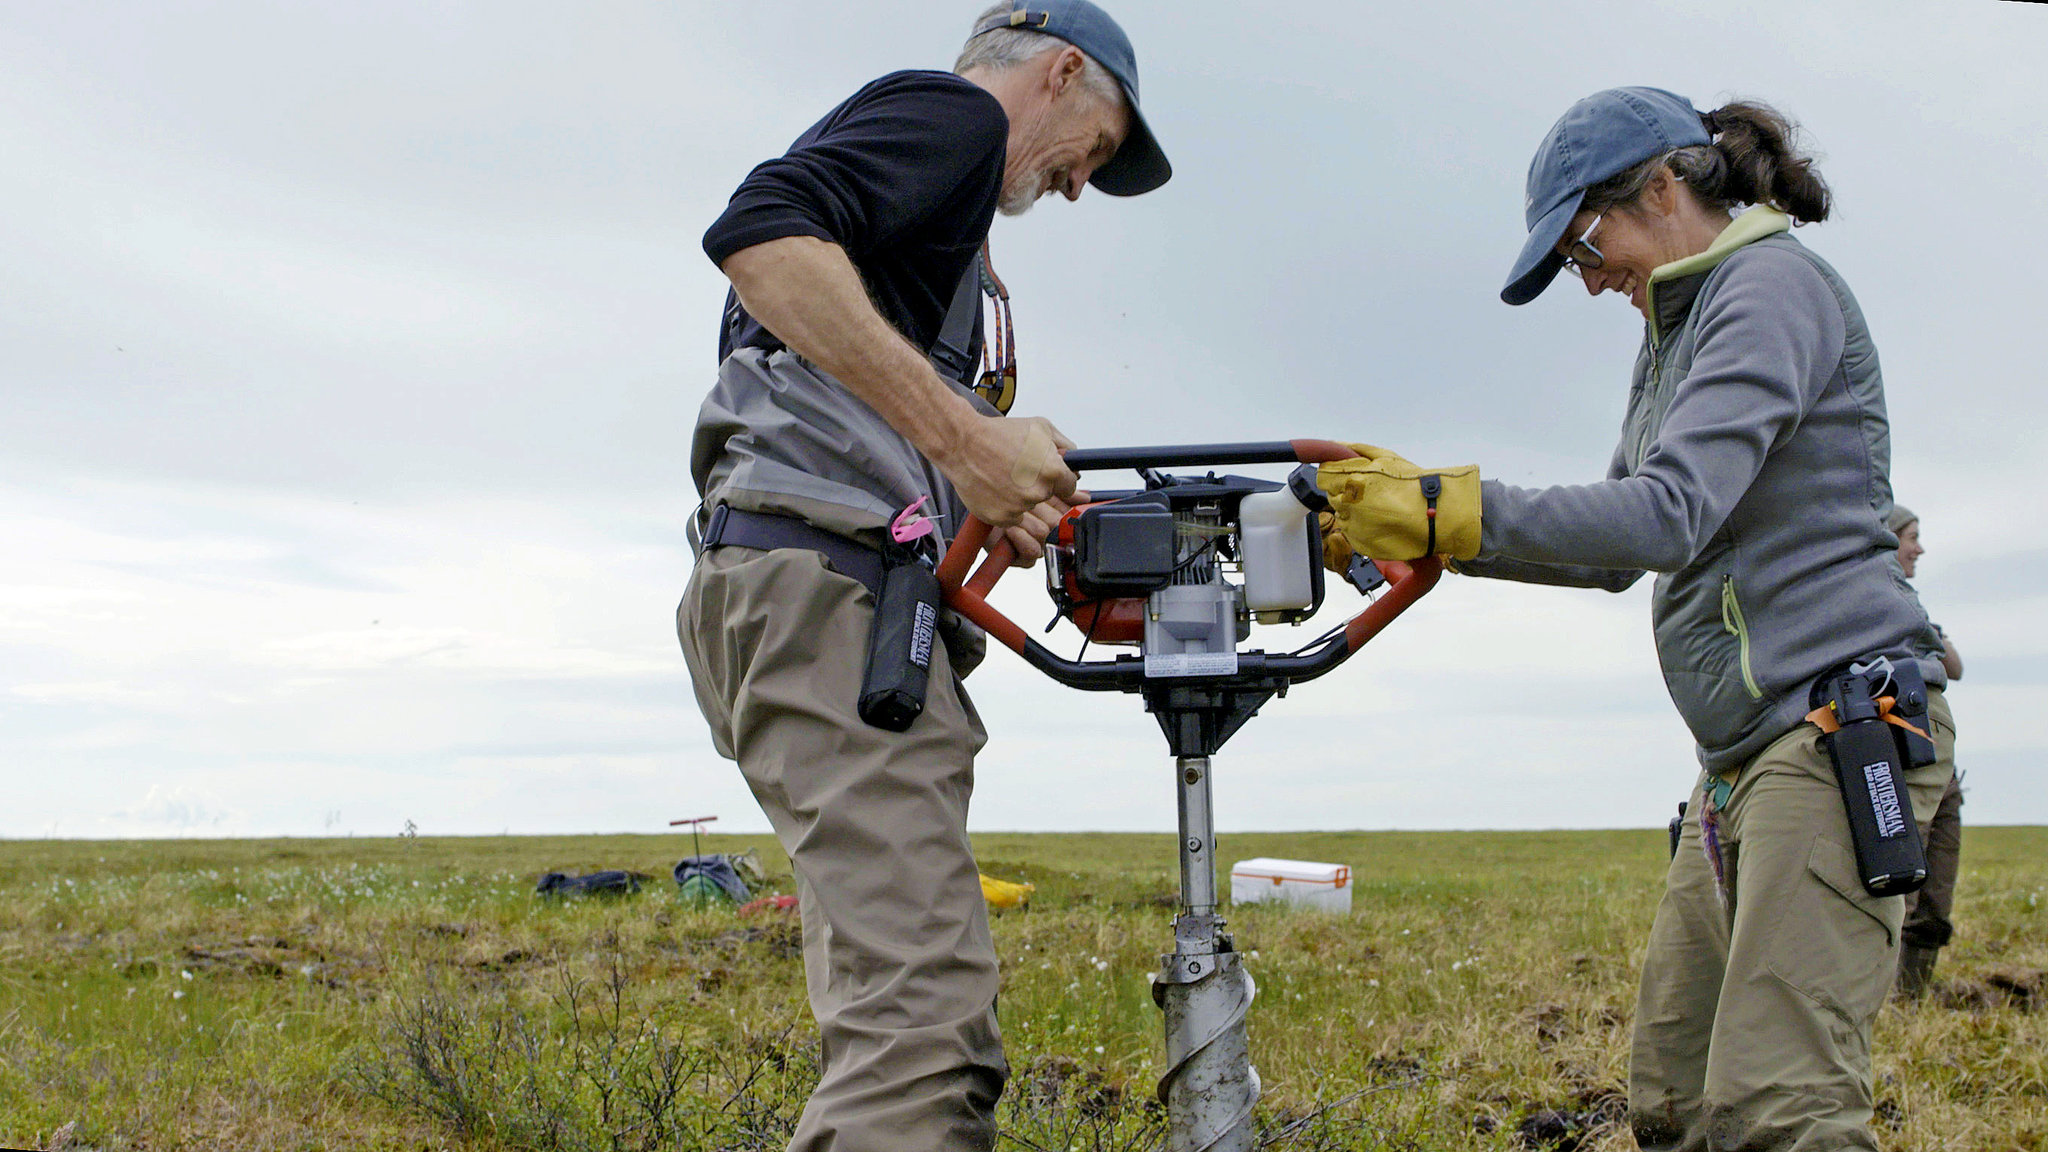 In an undated handout photo, Max Holmes and Sue Natali of the Woods Hole Research Center use an auger to drill core samples of permafrost in Alaska's vast Yukon Delta National Wildlife Refuge. The rate at which permafrost is thawing here is a vital question for climate scientists. "In order to know how much is lost, you have to know how much is there," Natali said. (Stash Wislocki via The New York Times)